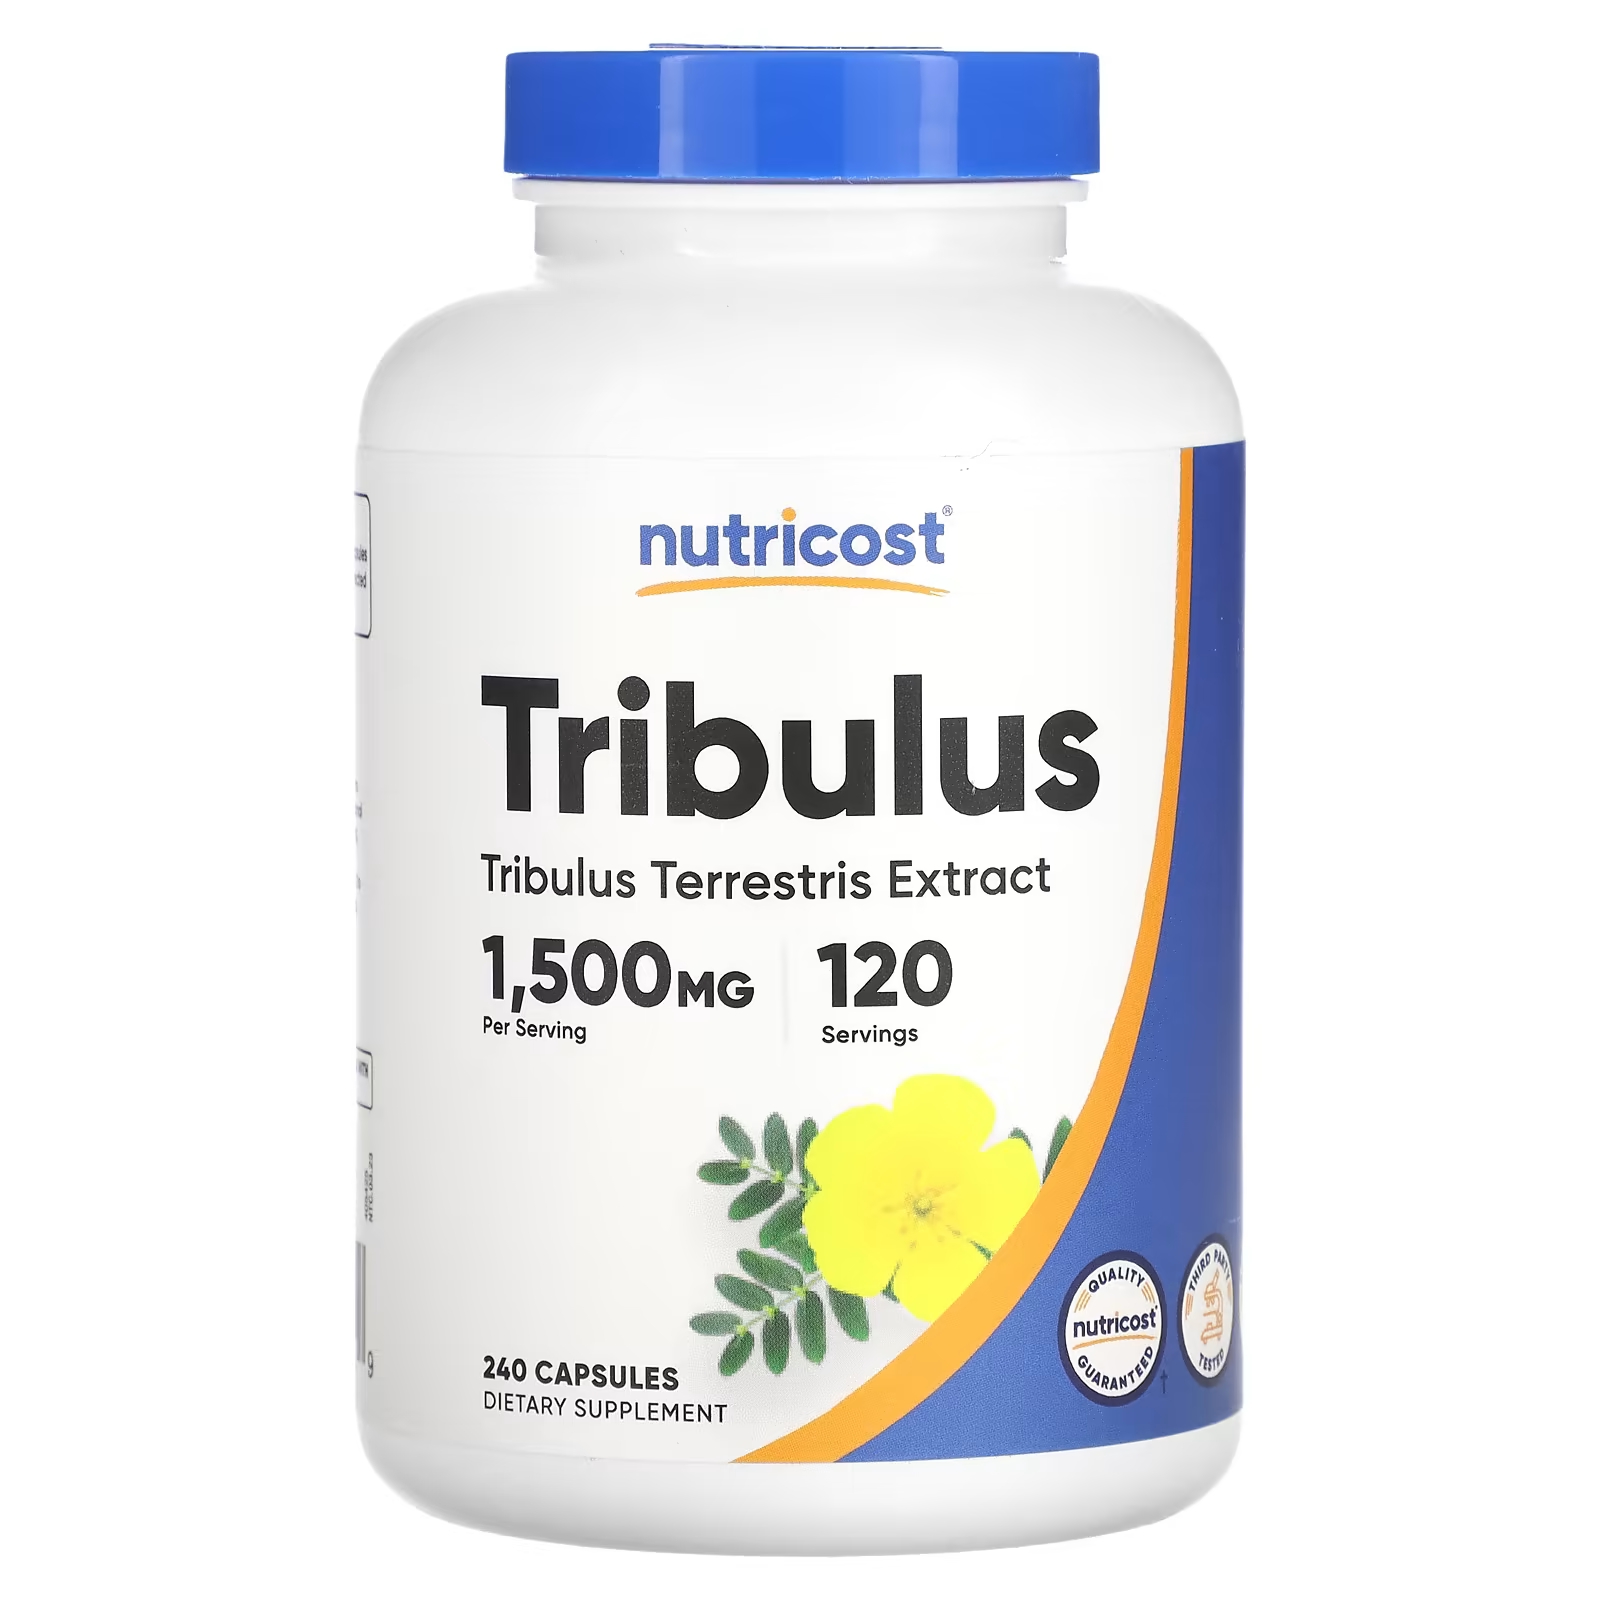 Nutricost Tribulus 1500 мг 240 капсул (750 мг на капсулу) nutricost tribulus 1500 мг 240 капсул 750 мг на капсулу